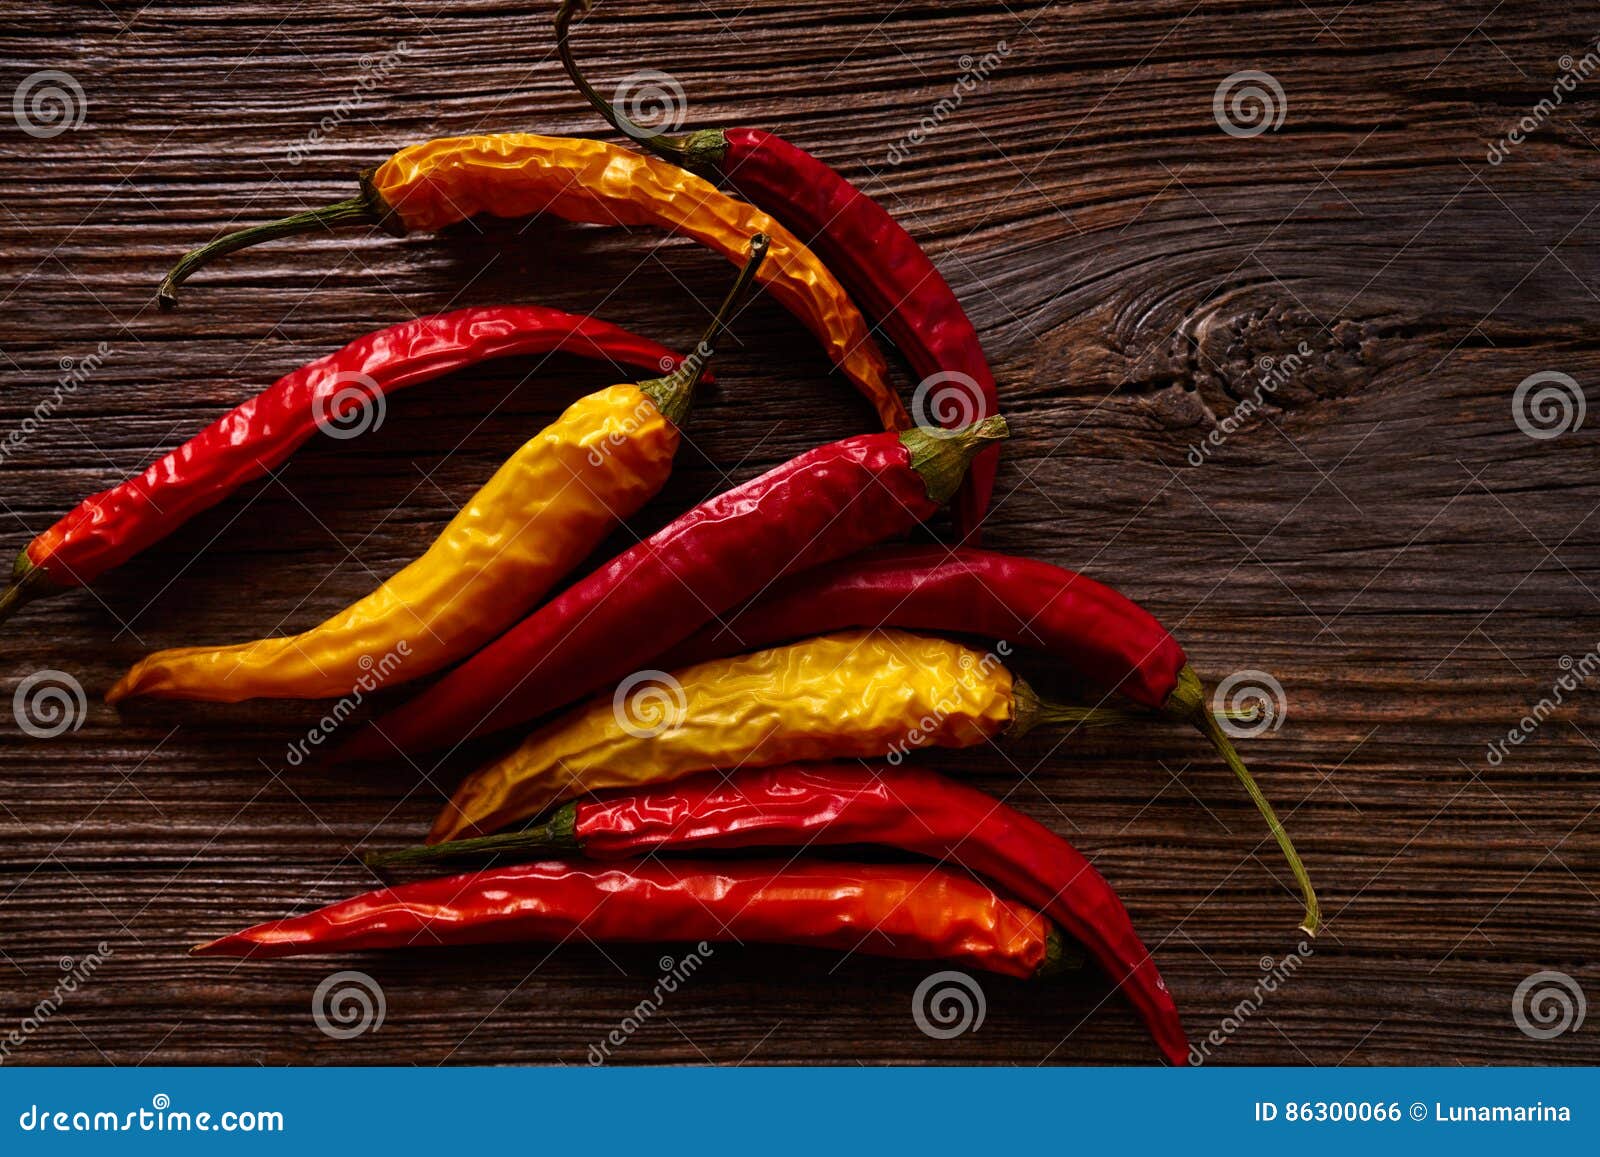 dried hot chili peppers on aged wood